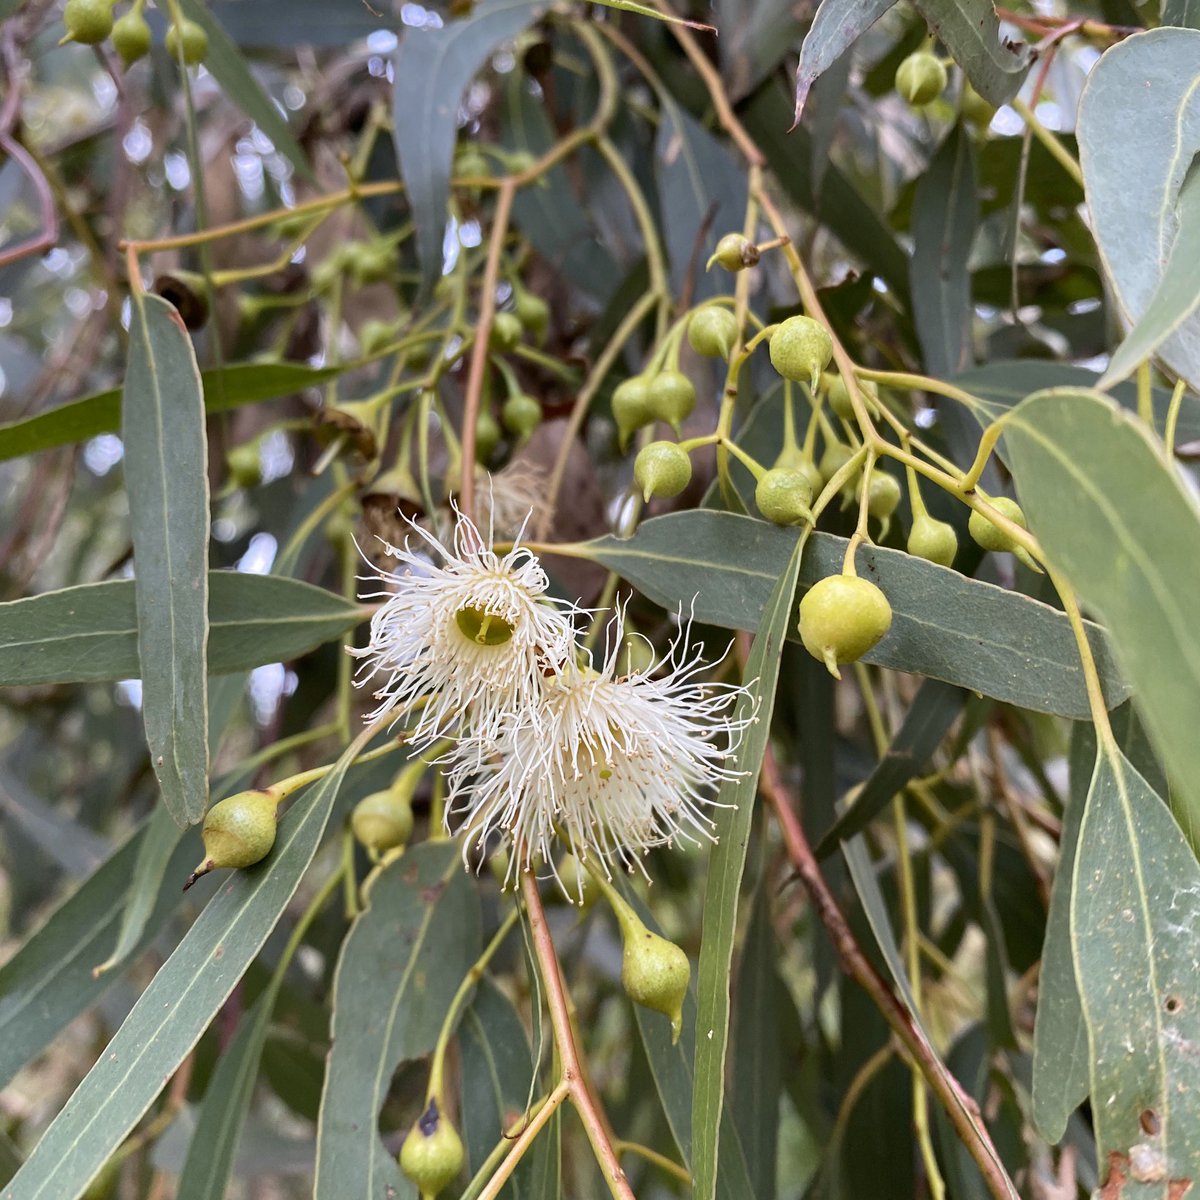 The hop goodenia, correas, casuarinas, & many eucalypts are flowering. Words are more than just words: they shape our understanding. I‘ve made a conscious effort to stop applying European seasonal names to this continent; I’d urge other non-Indigenous people here to do the same.